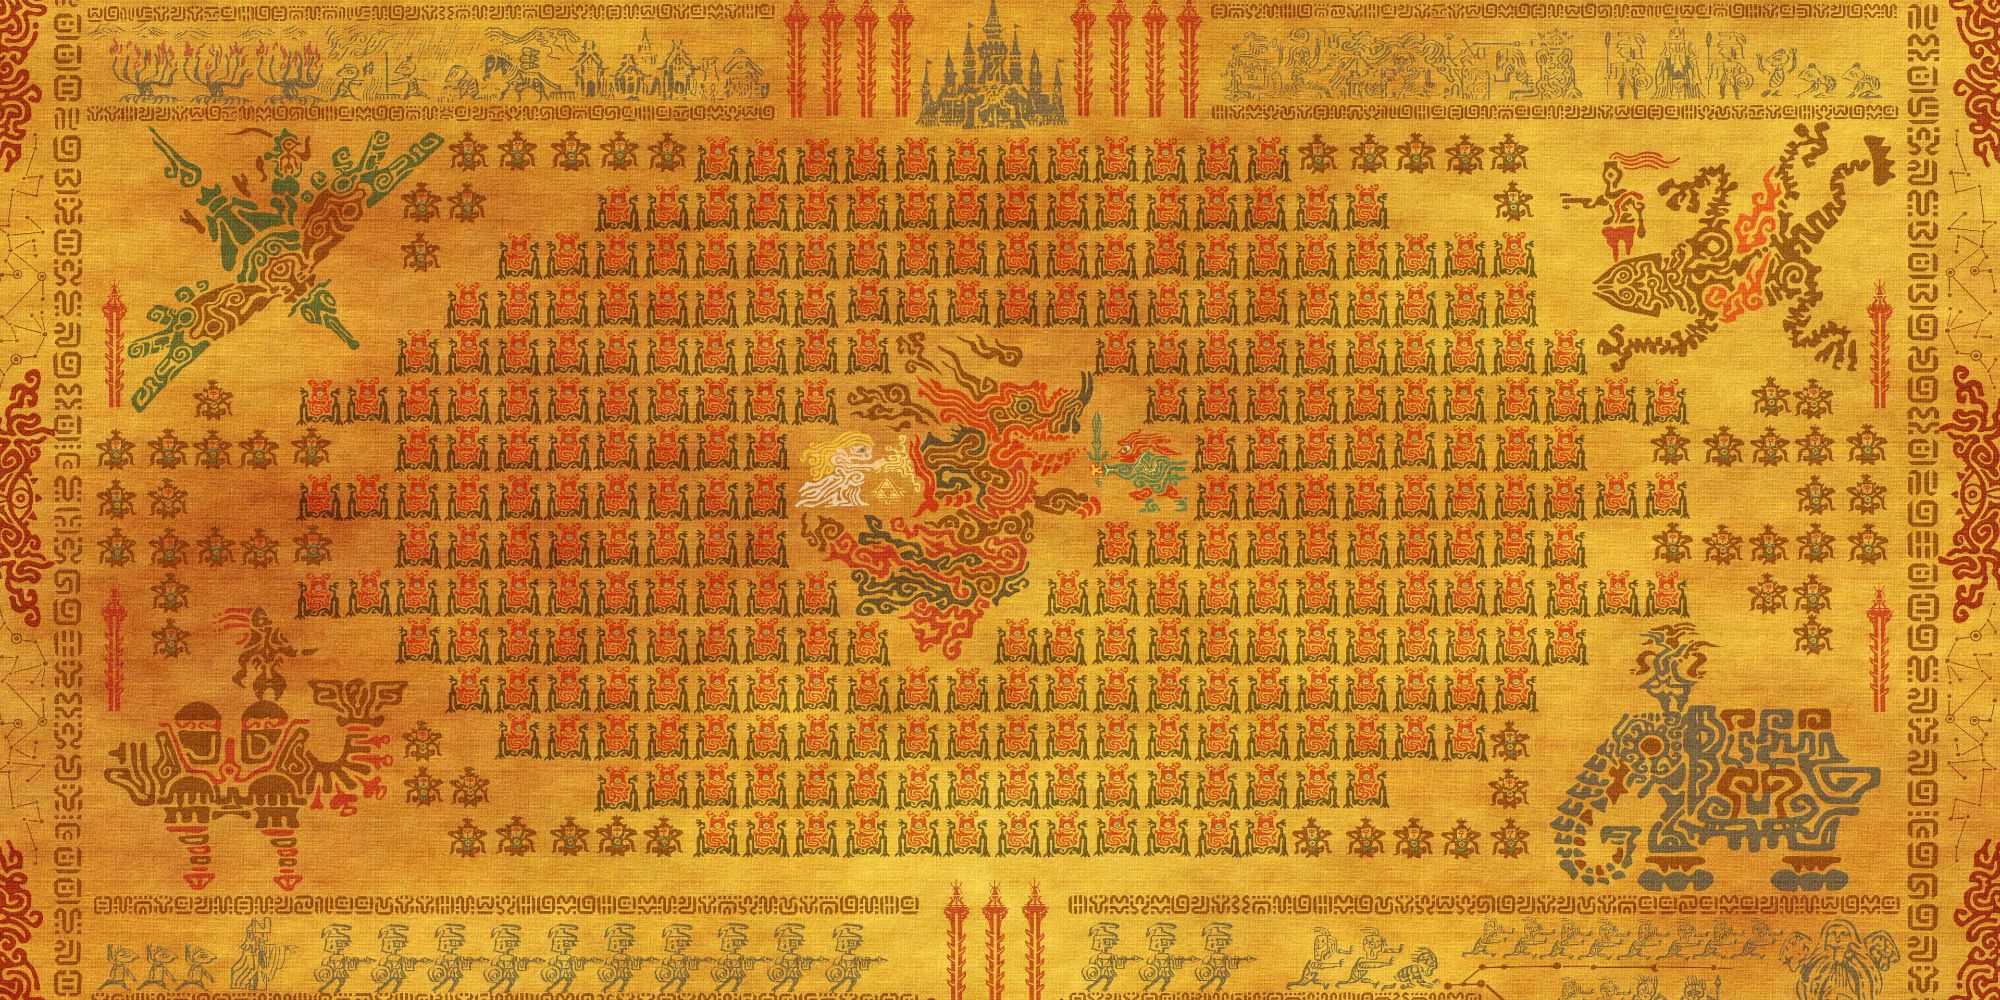 The tapestry in Impa's house depicts the First Great Calamity, in which the Guardians succeeded in sealing away Calamity Ganon